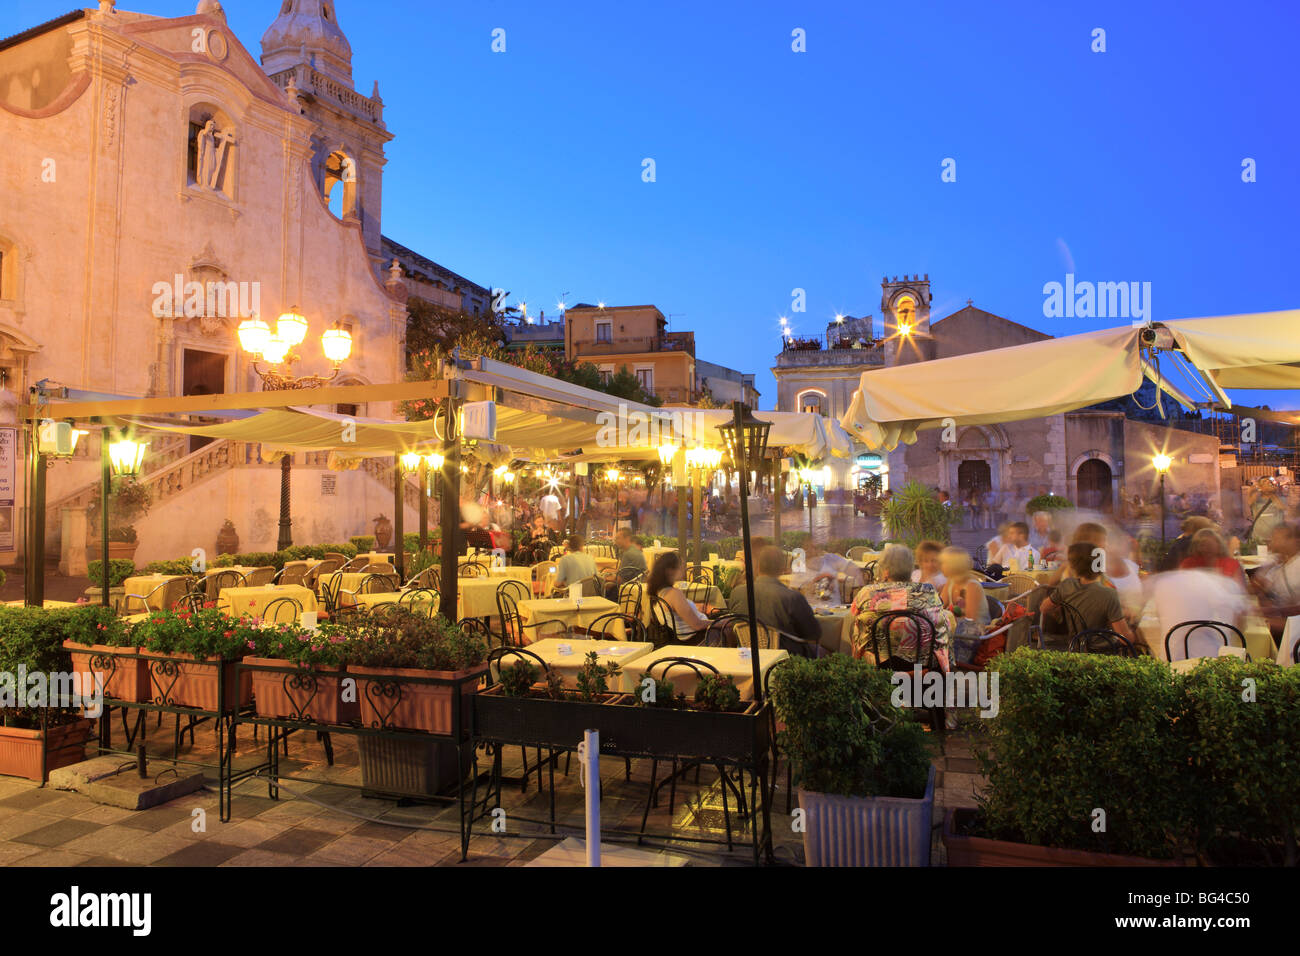 People in a restaurant, Taormina, Sicily, Italy, Europe Stock Photo